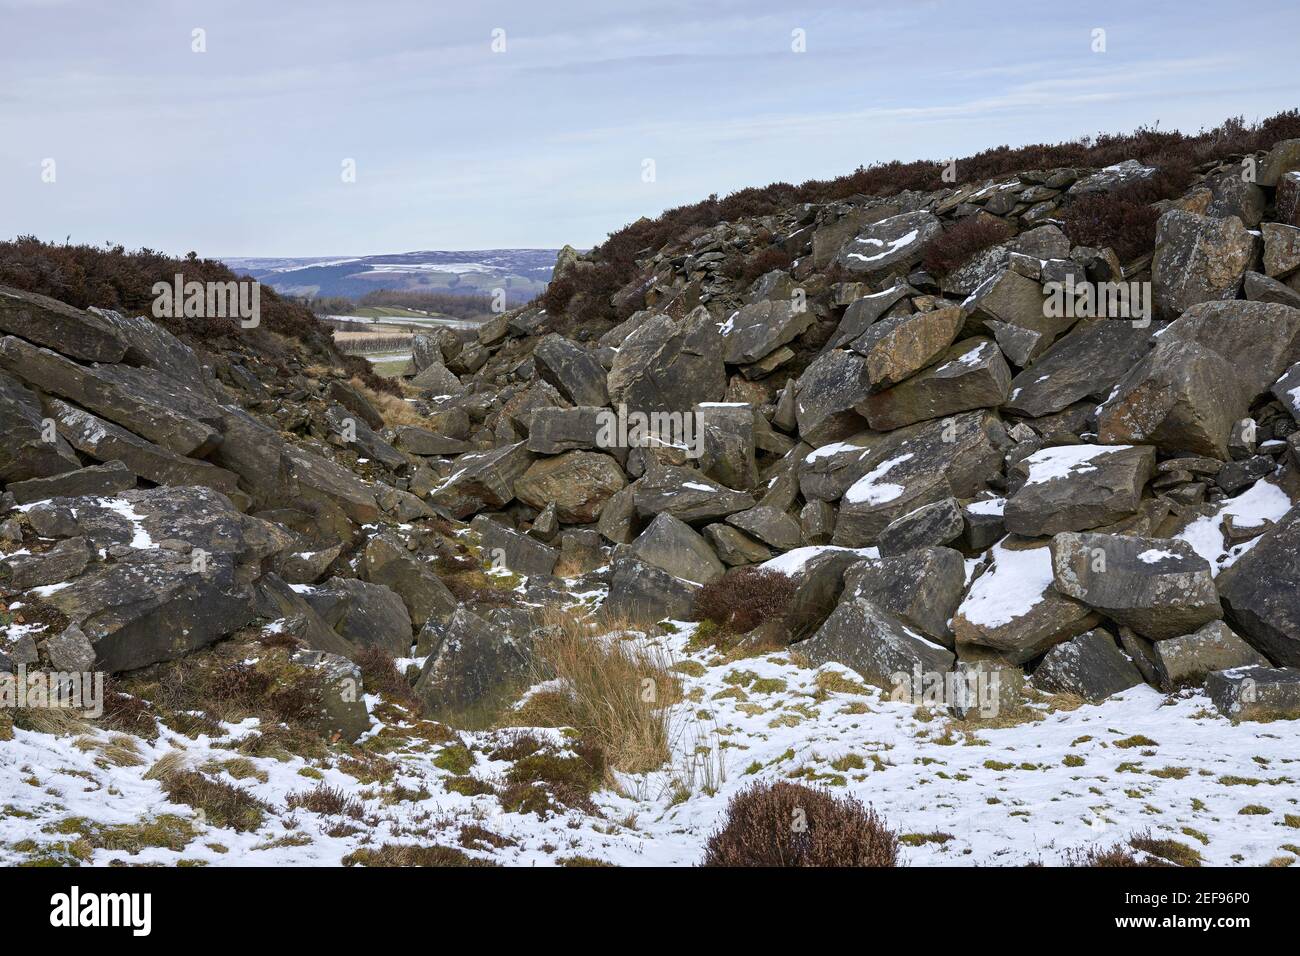 With tribute to the industrial past of Nidderdale, a view through discarded rocks and spoil heaps Stock Photo